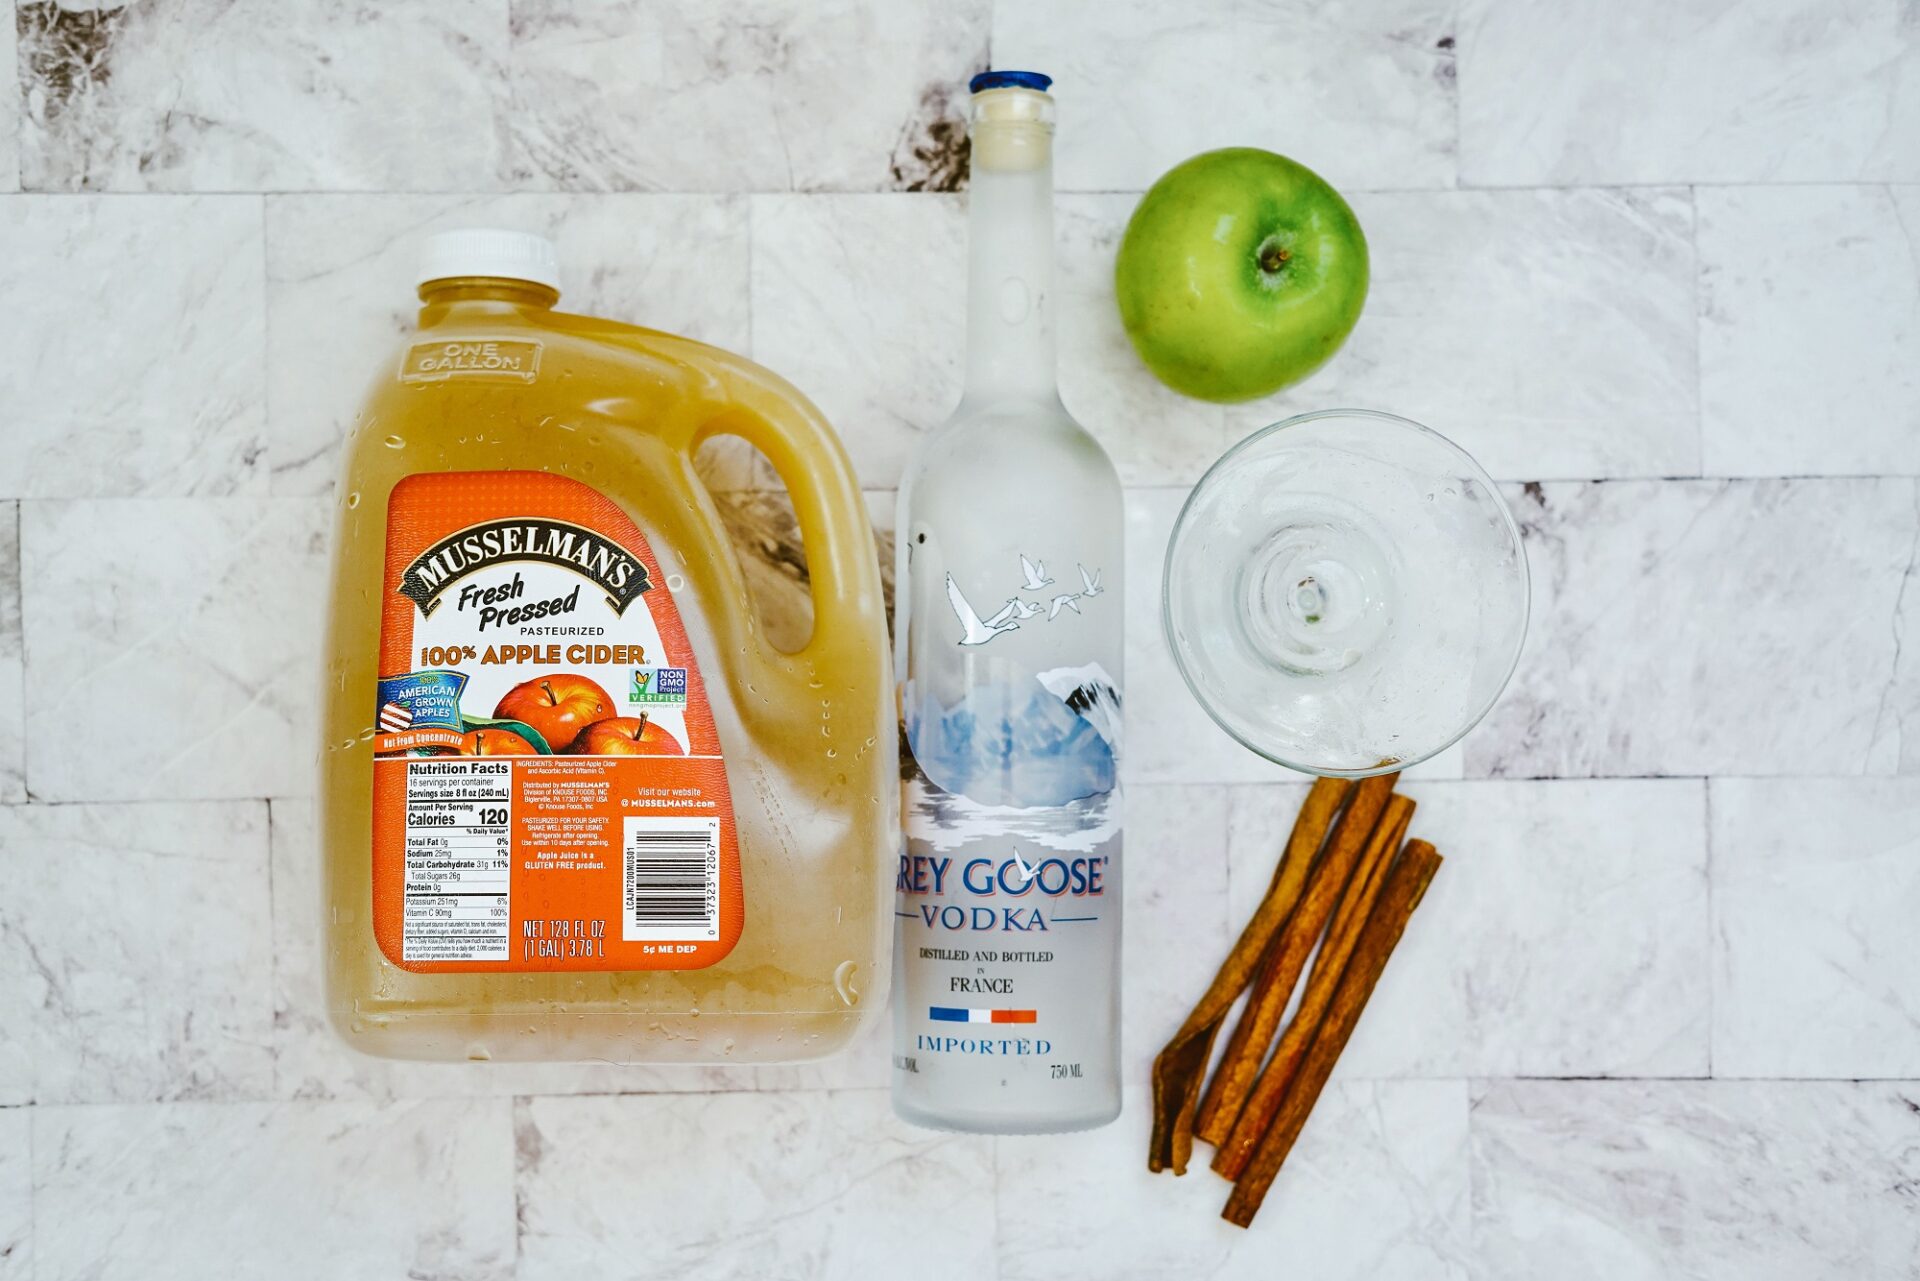 Ingredients for apple cider martini on a counter.